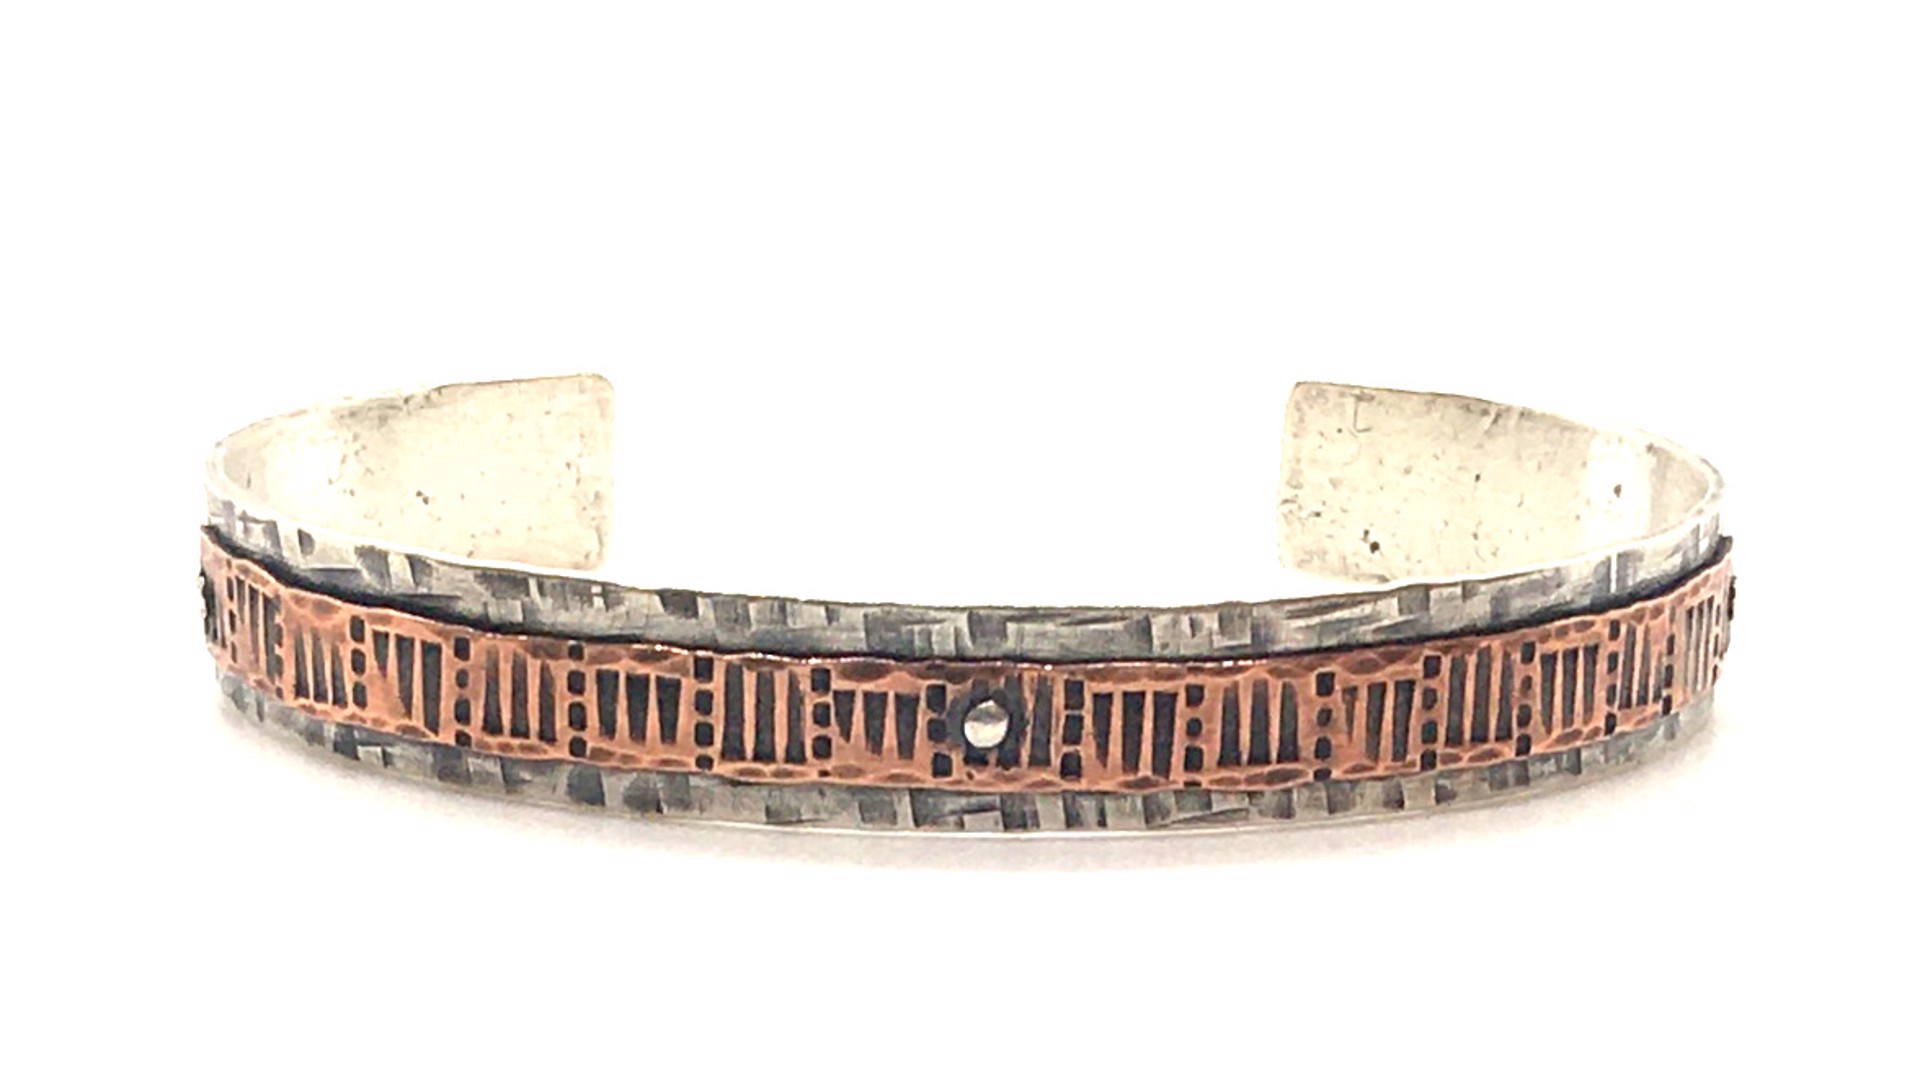 Handmade Riveted Silver and Copper Stacker Cuff  Medium by Grace Ashford